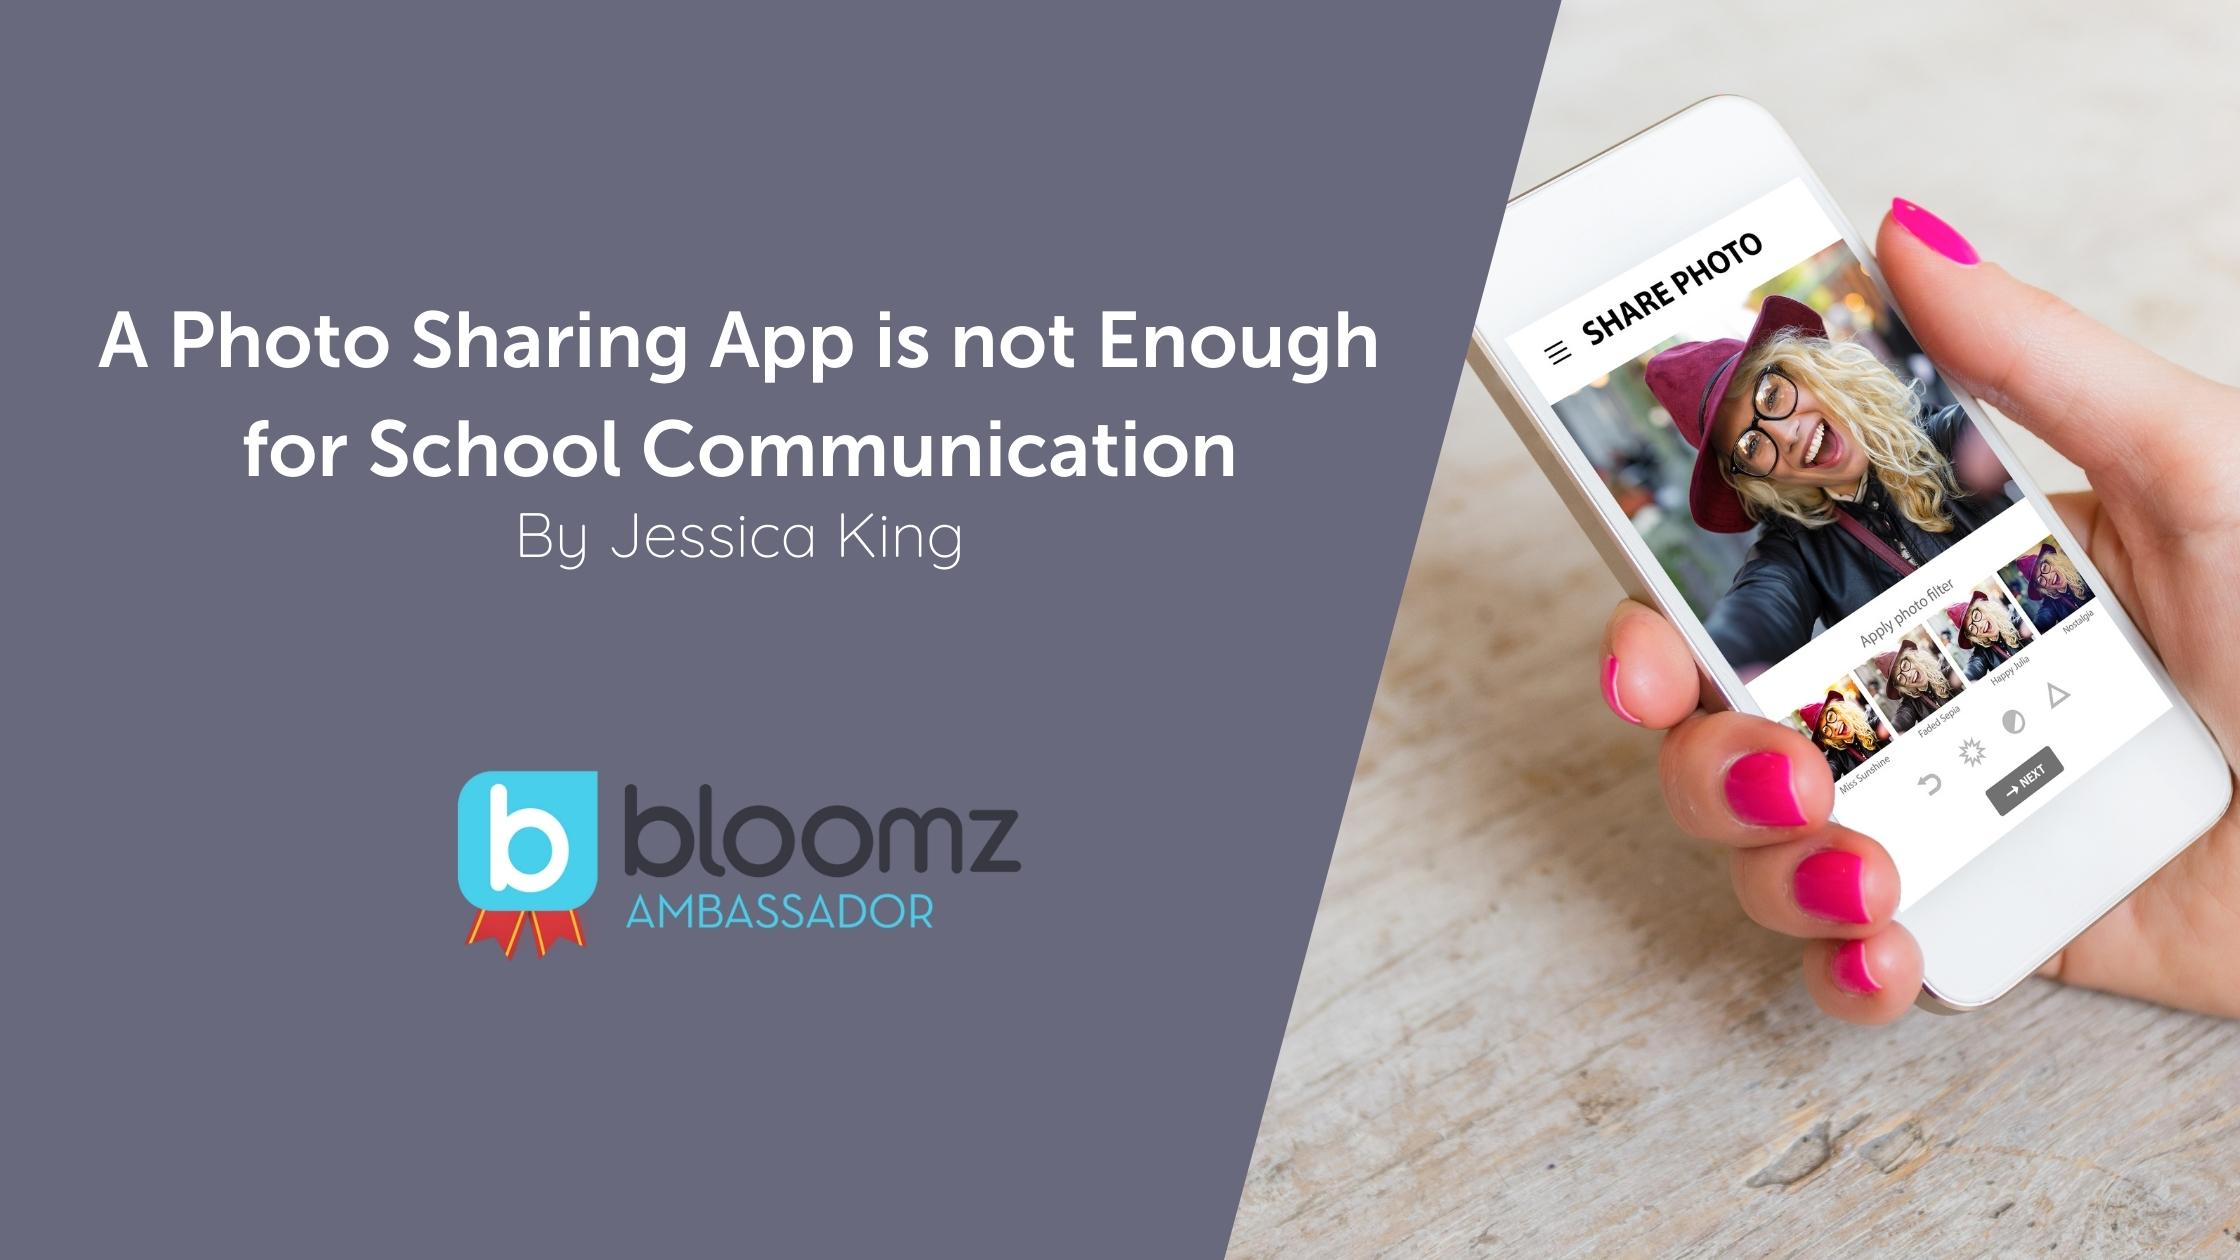 A Photo Sharing App is not Enough for School Communication